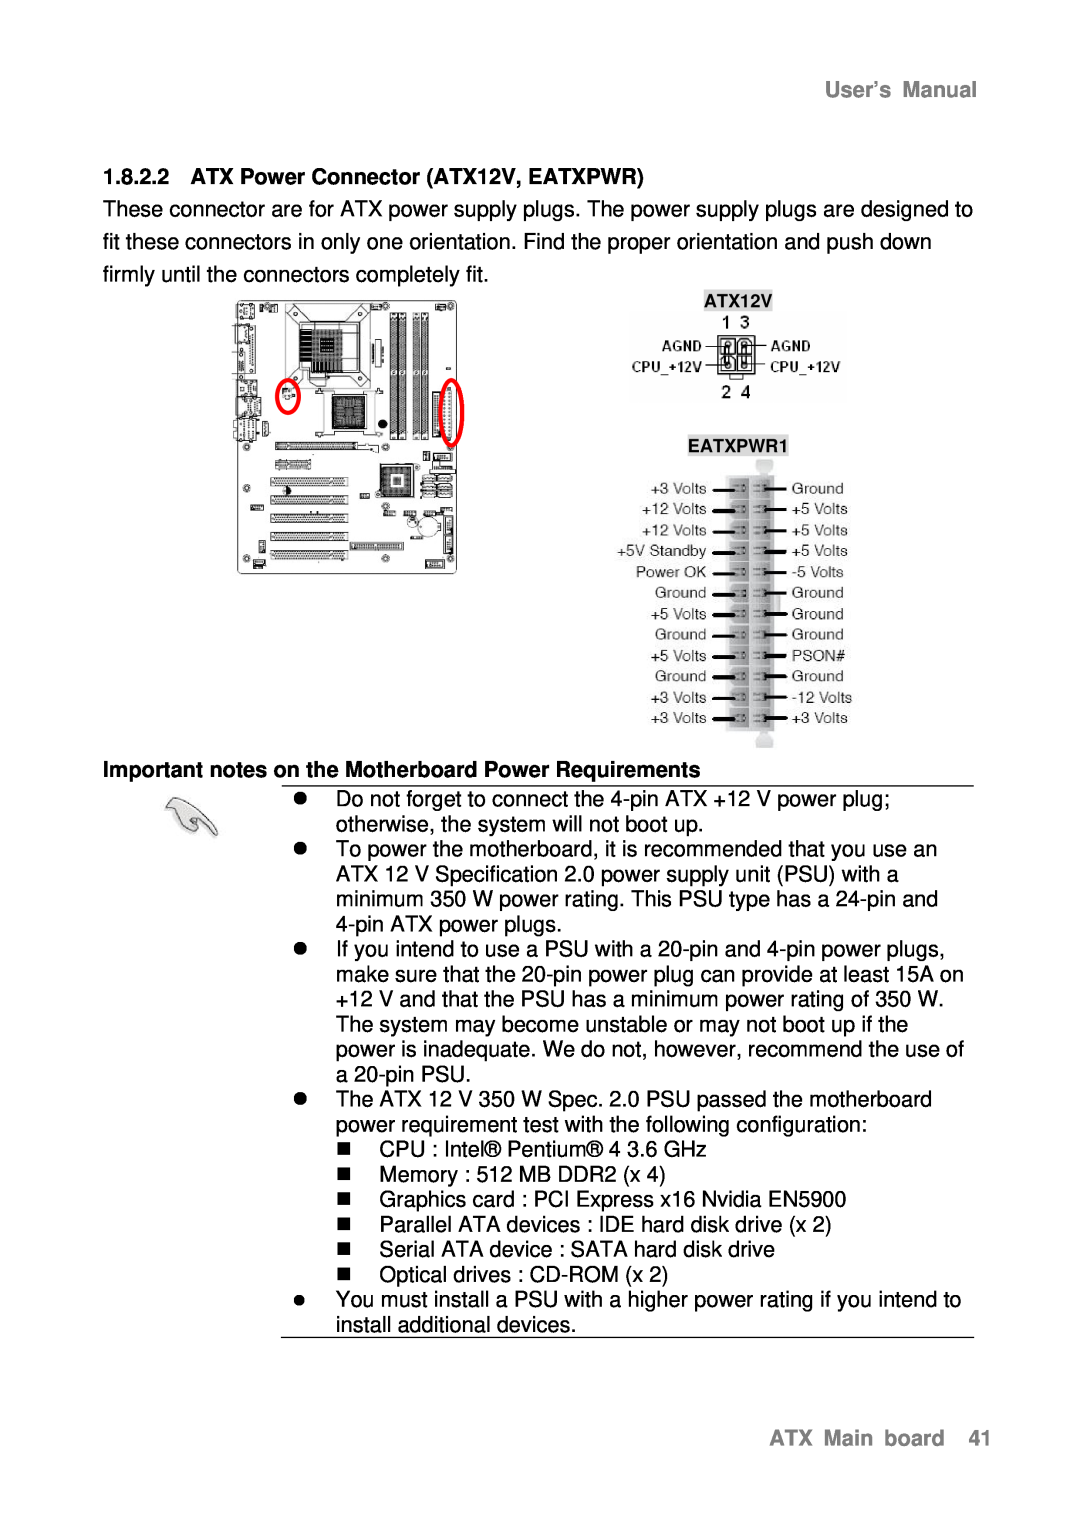 Intel AX965Q ATX Power Connector ATX12V, EATXPWR, Important notes on the Motherboard Power Requirements, User’s Manual 